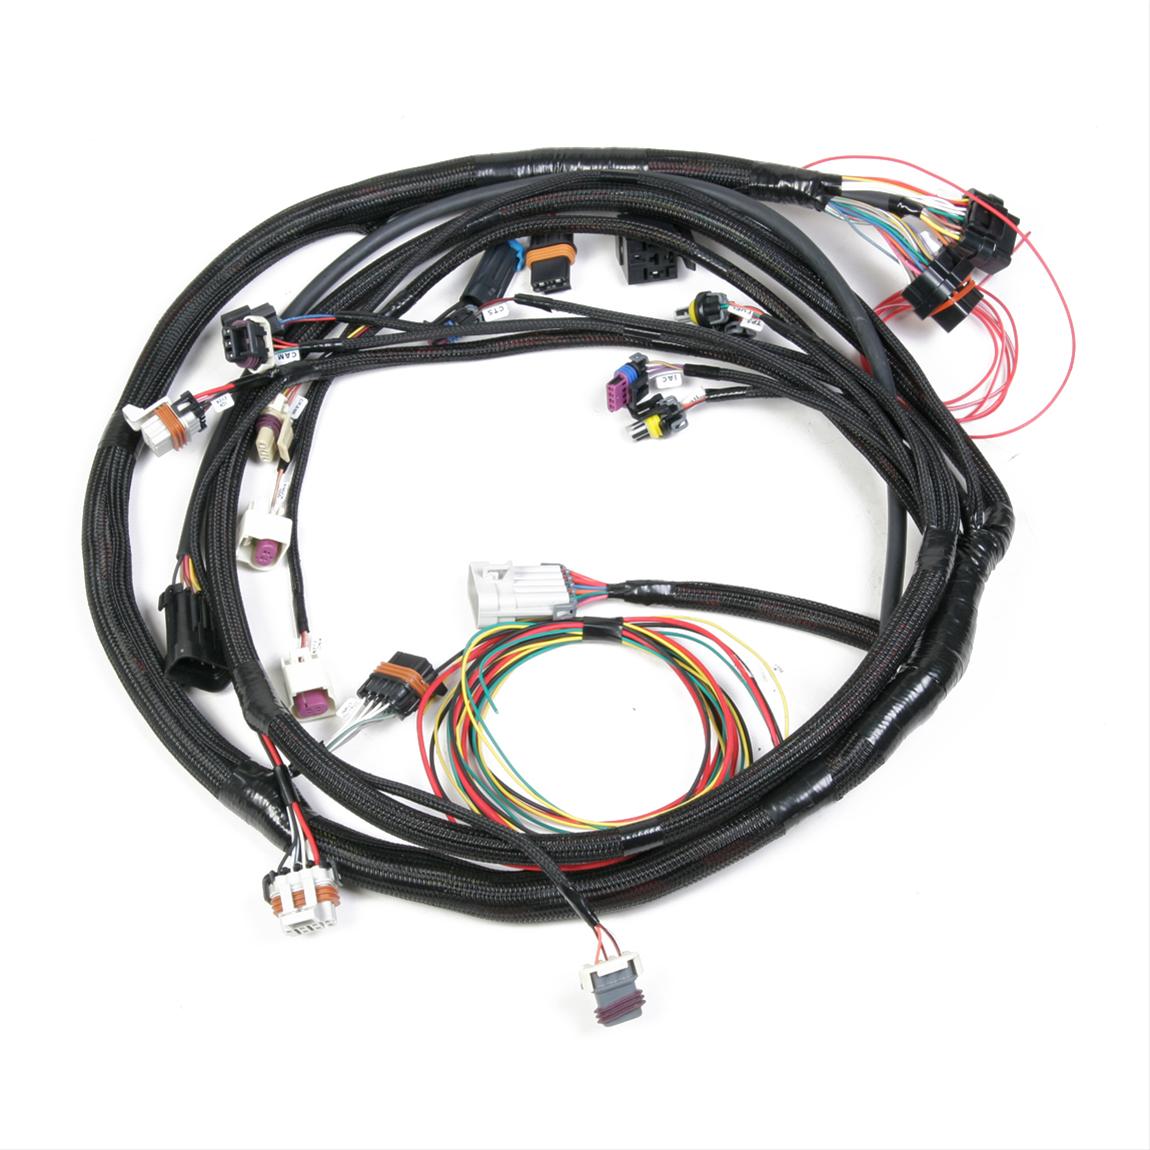 Holley EFI Systems Main Wiring Harness